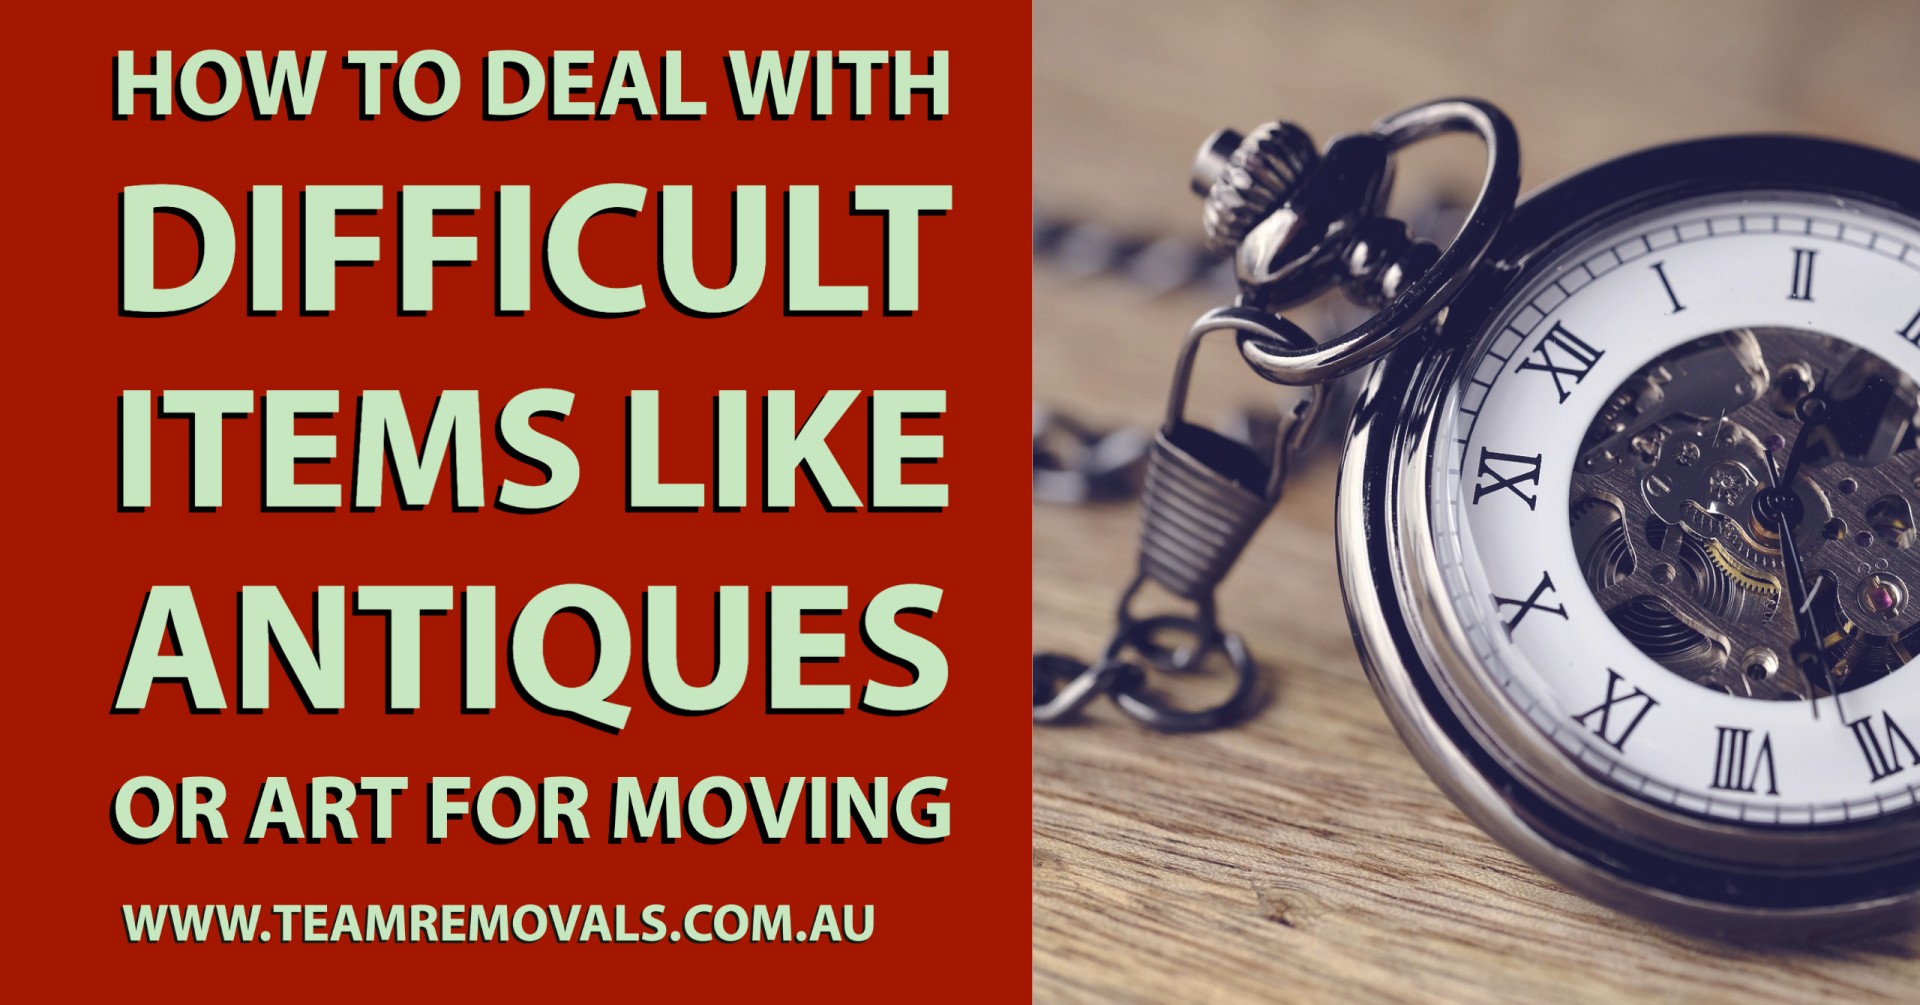 How to Deal With Difficult Items Like Antiques Or Art For Moving